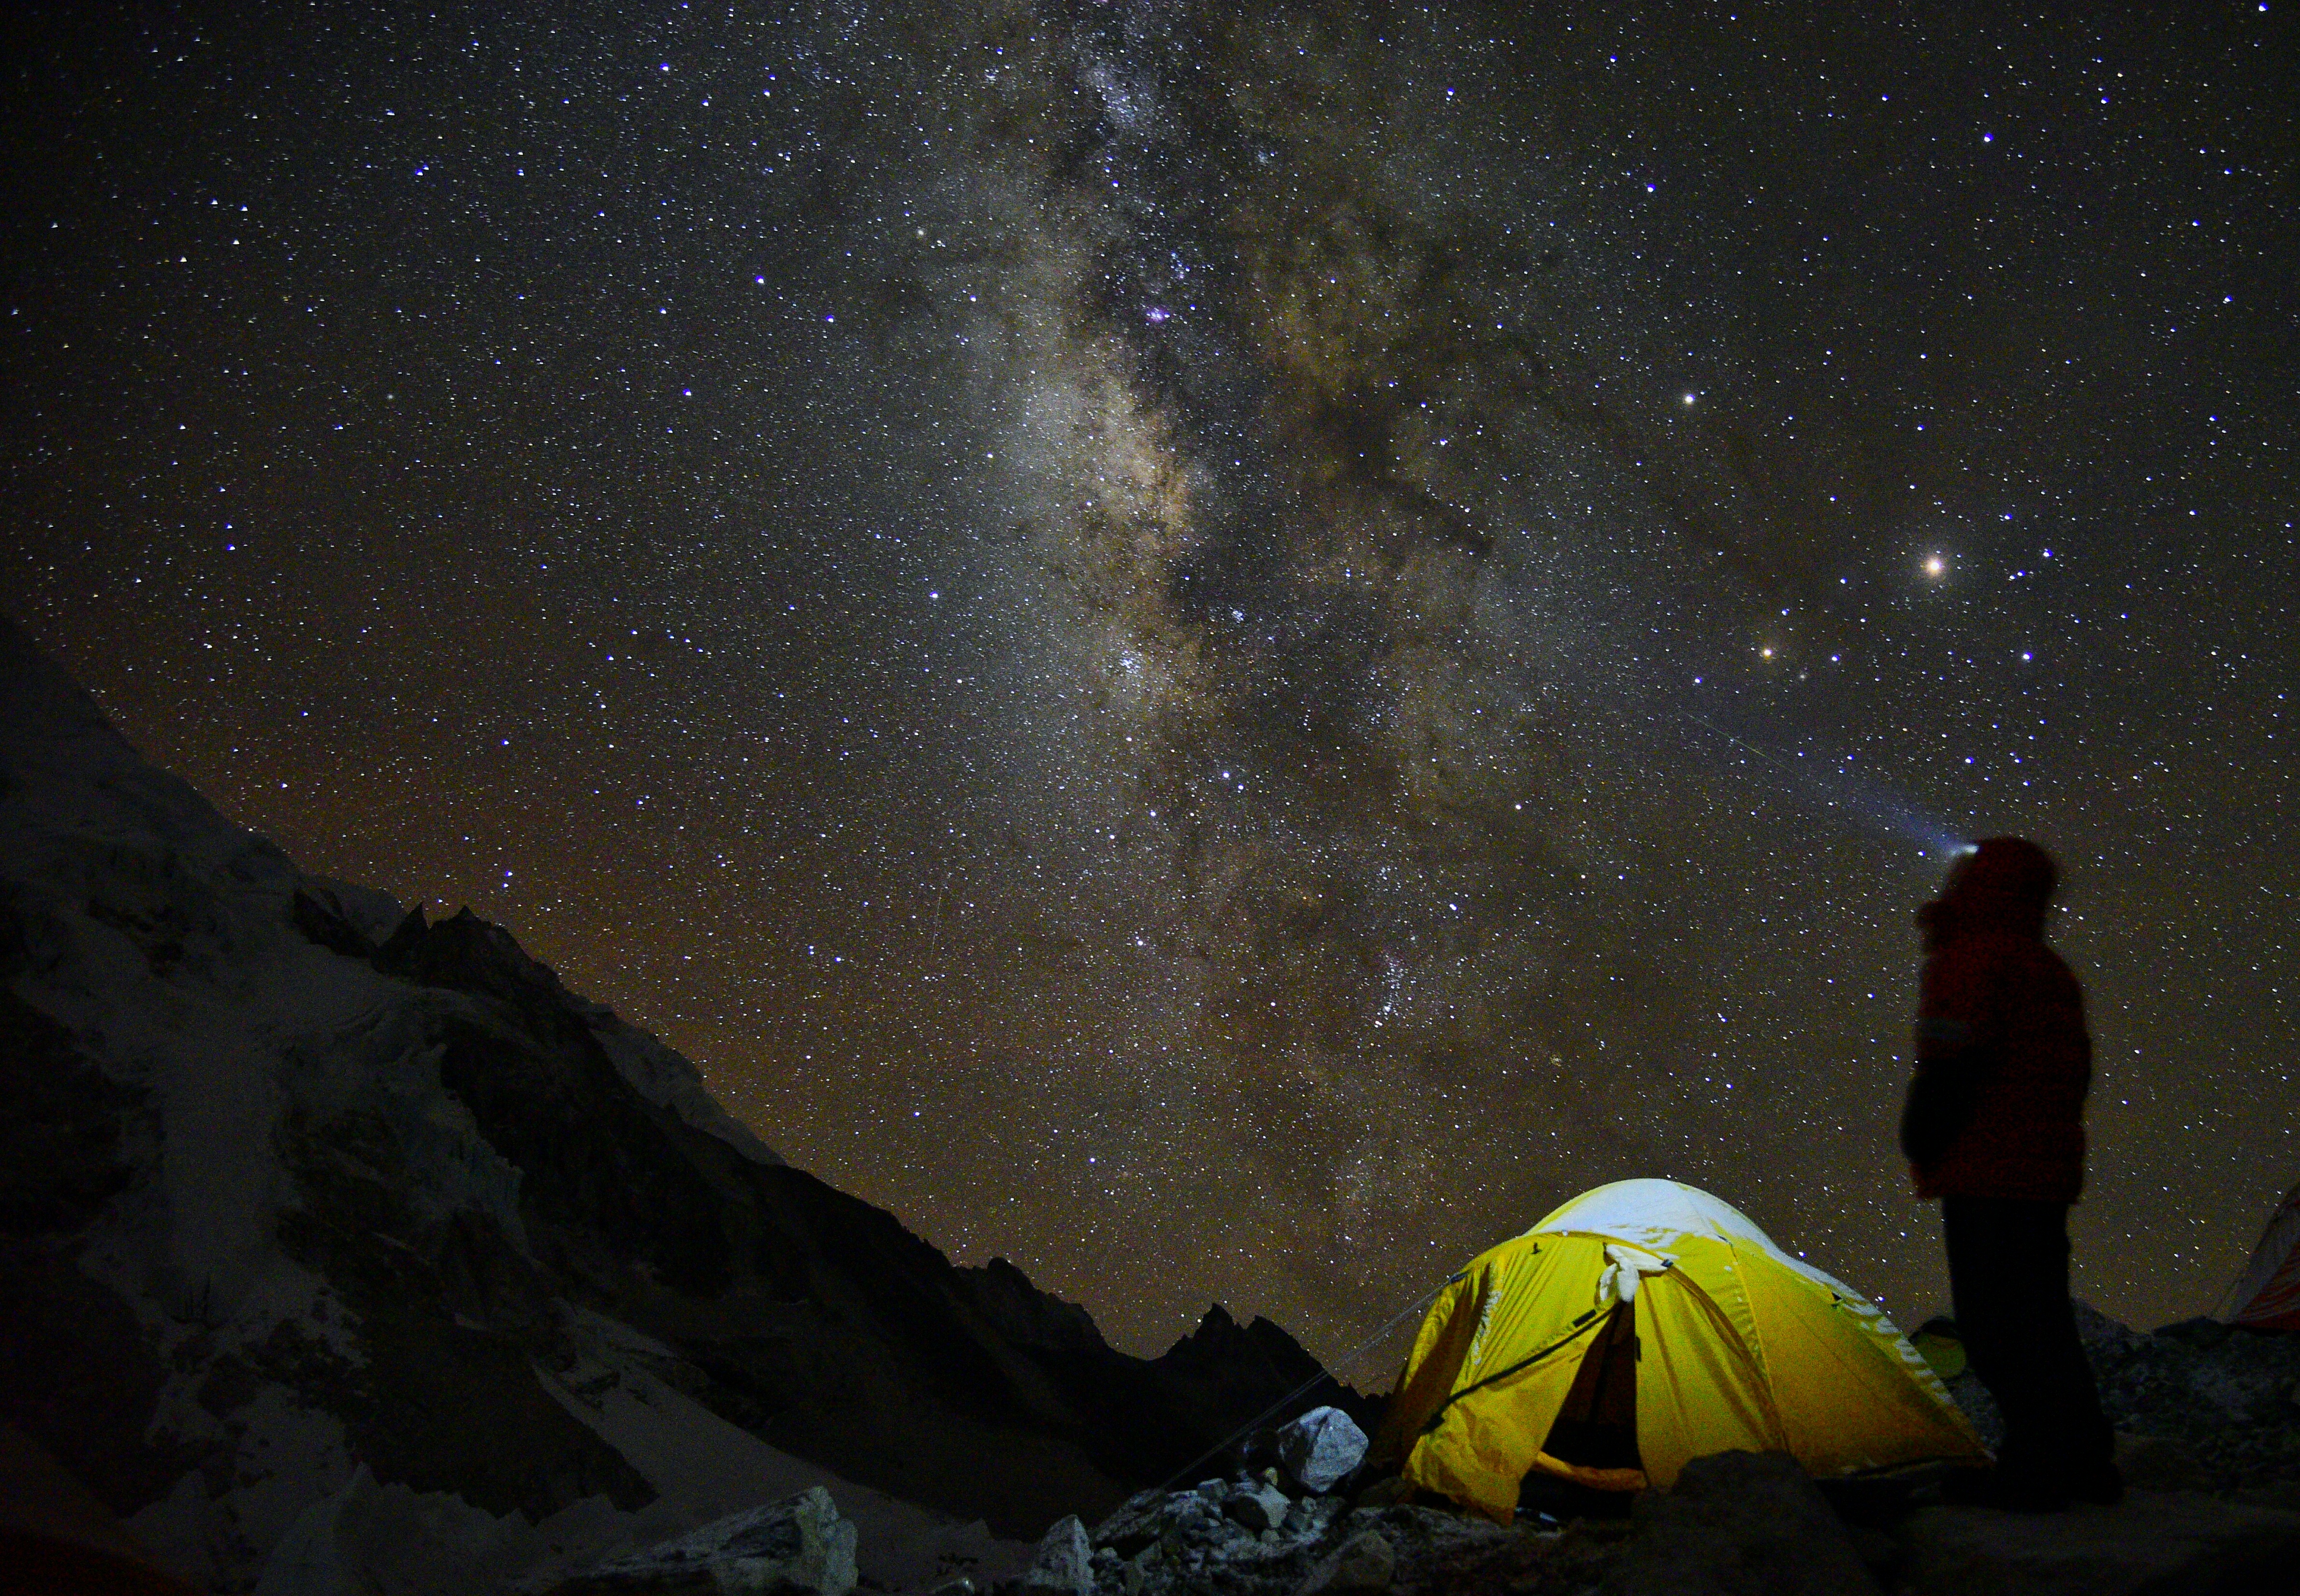 A clear Milky Way galaxy as seen from EBC. Image © Kuntal Joisher